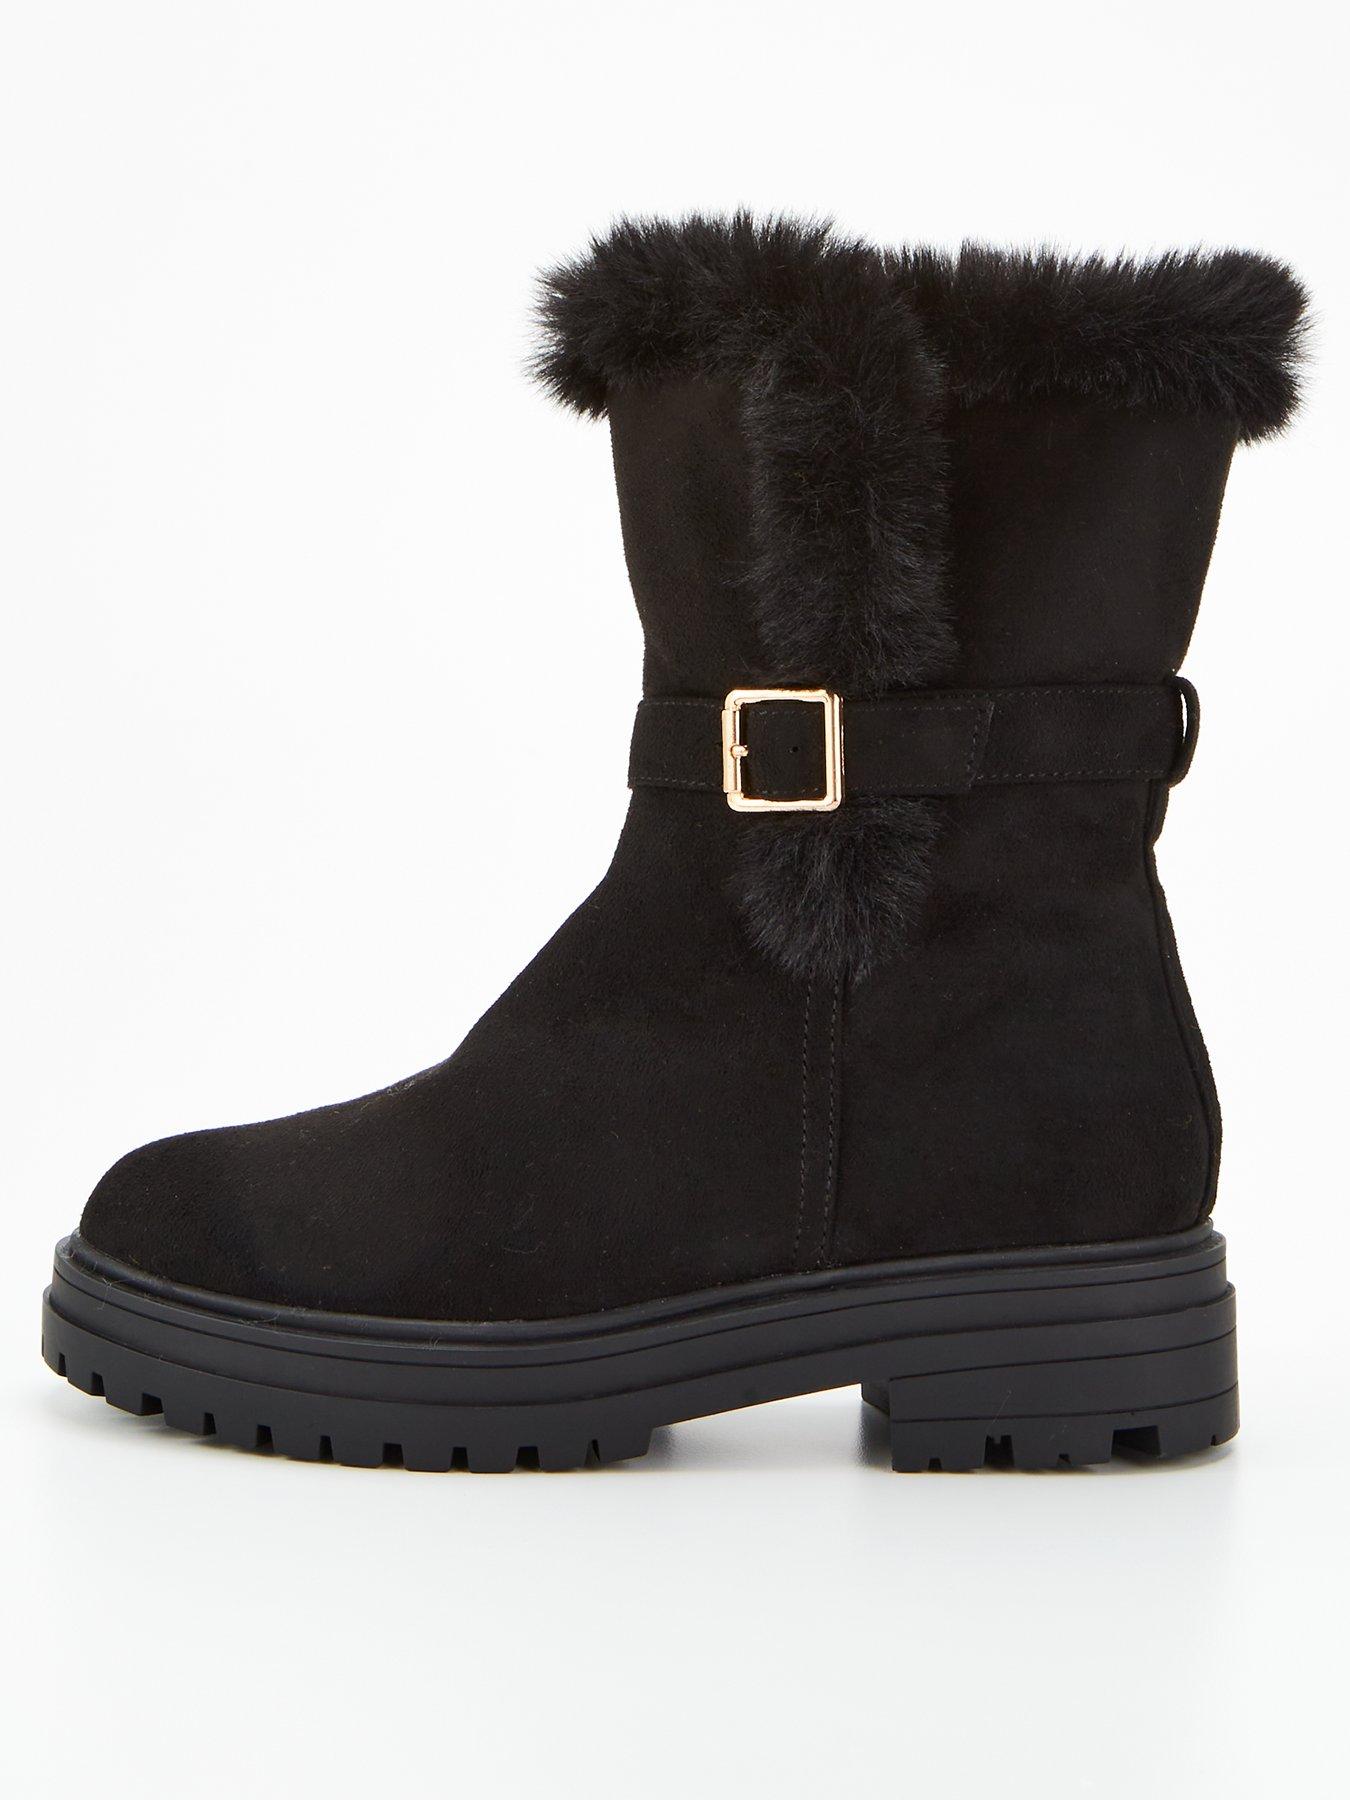 Halo: Black Leather & Shearling - Wide Fur Lined Sneakers – Sole